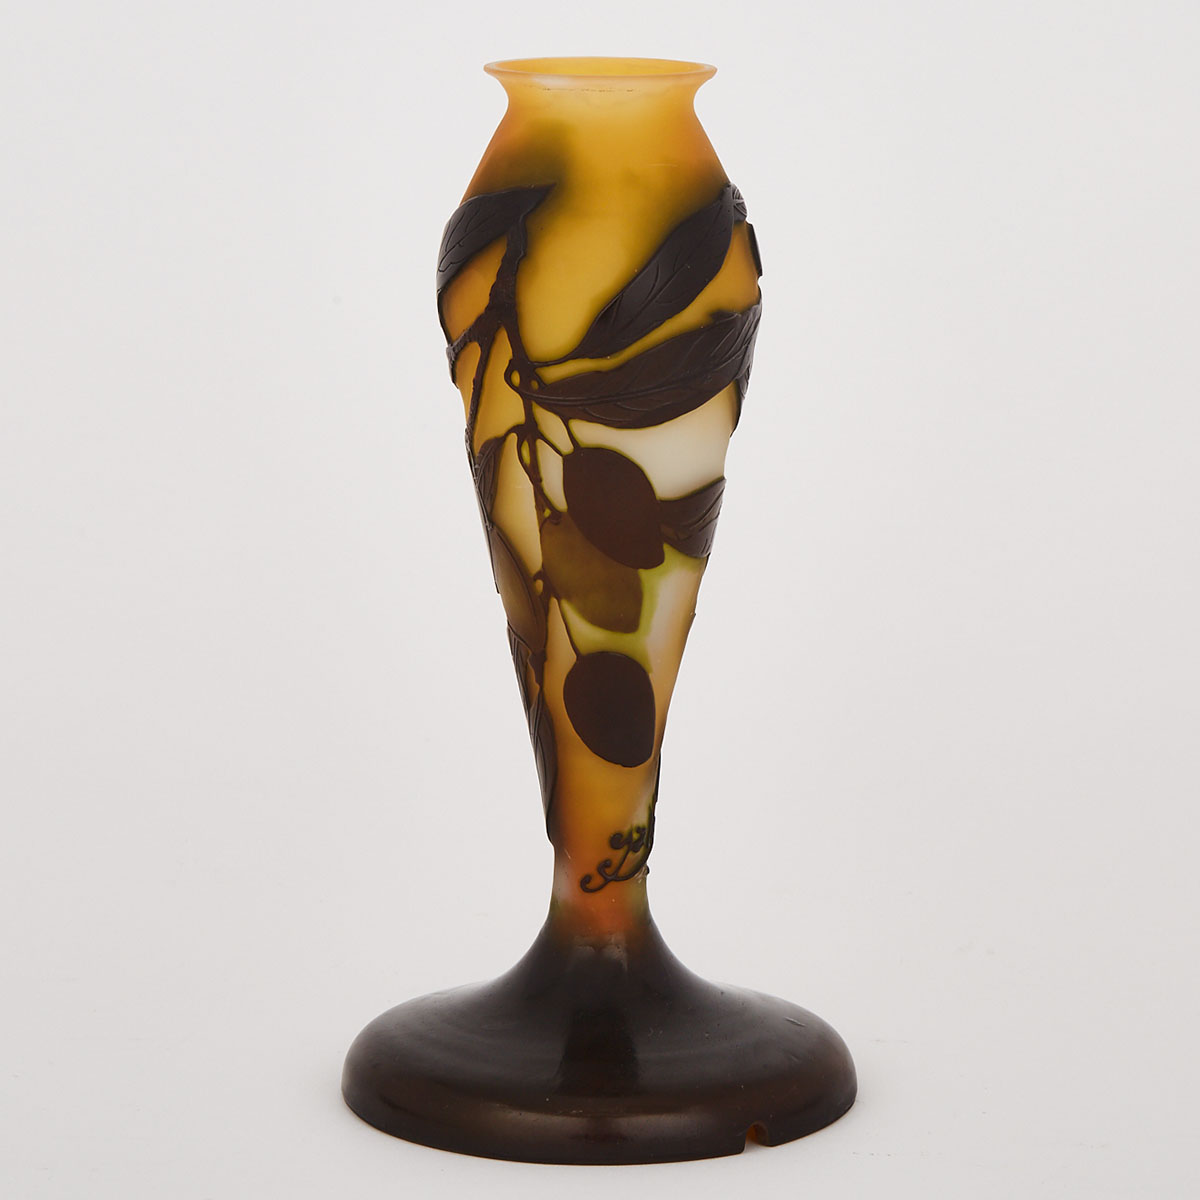 Gallé ‘Olives’ Cameo Glass Table Lamp Base, early 20th century